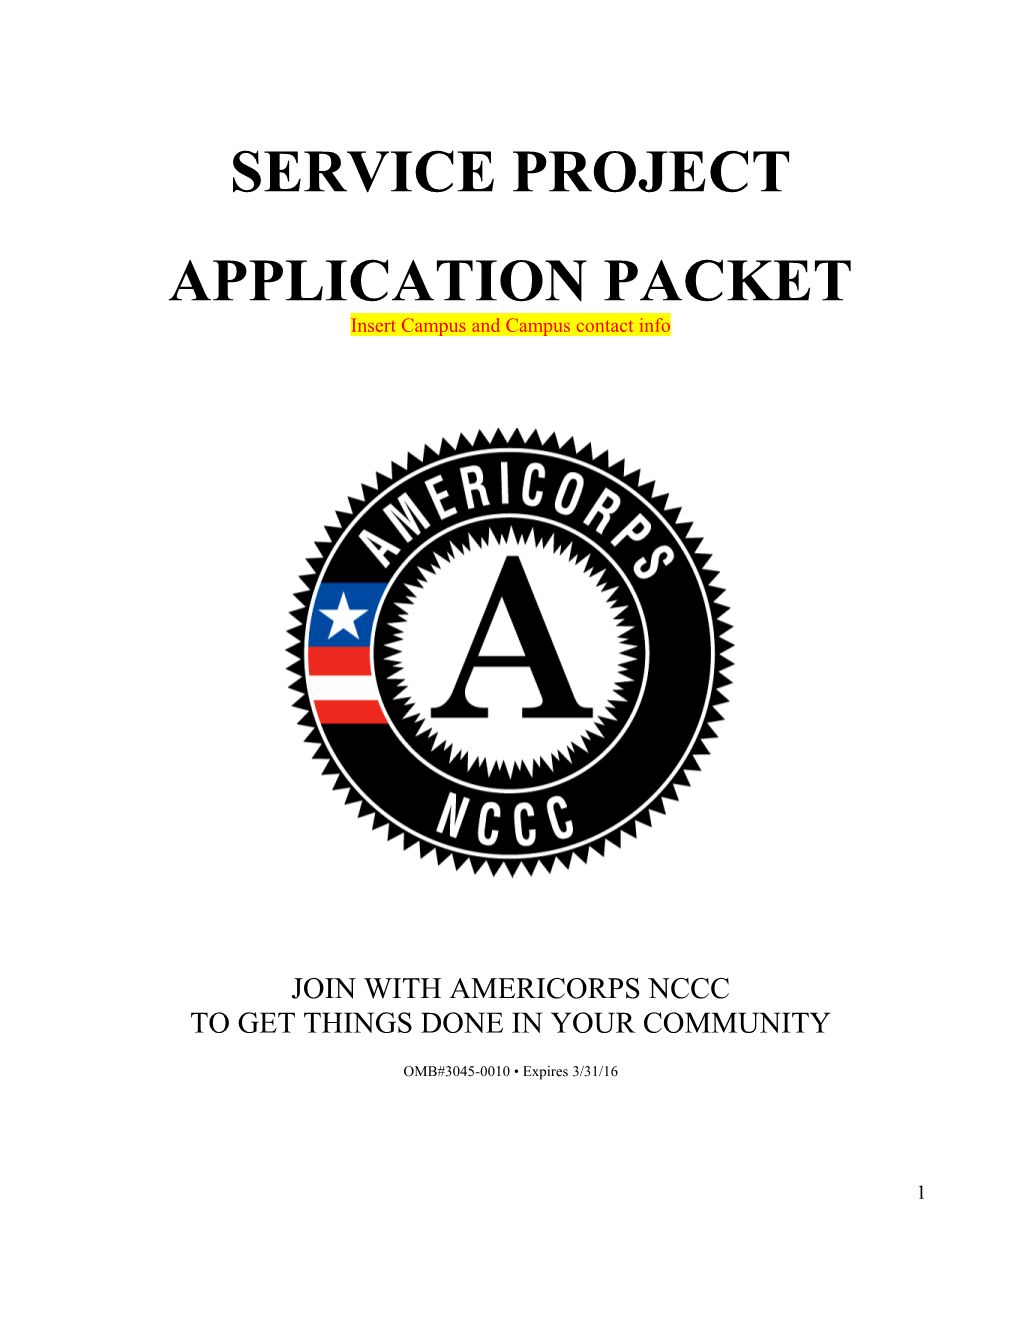 Americorps NCCC Service Project Application Packet